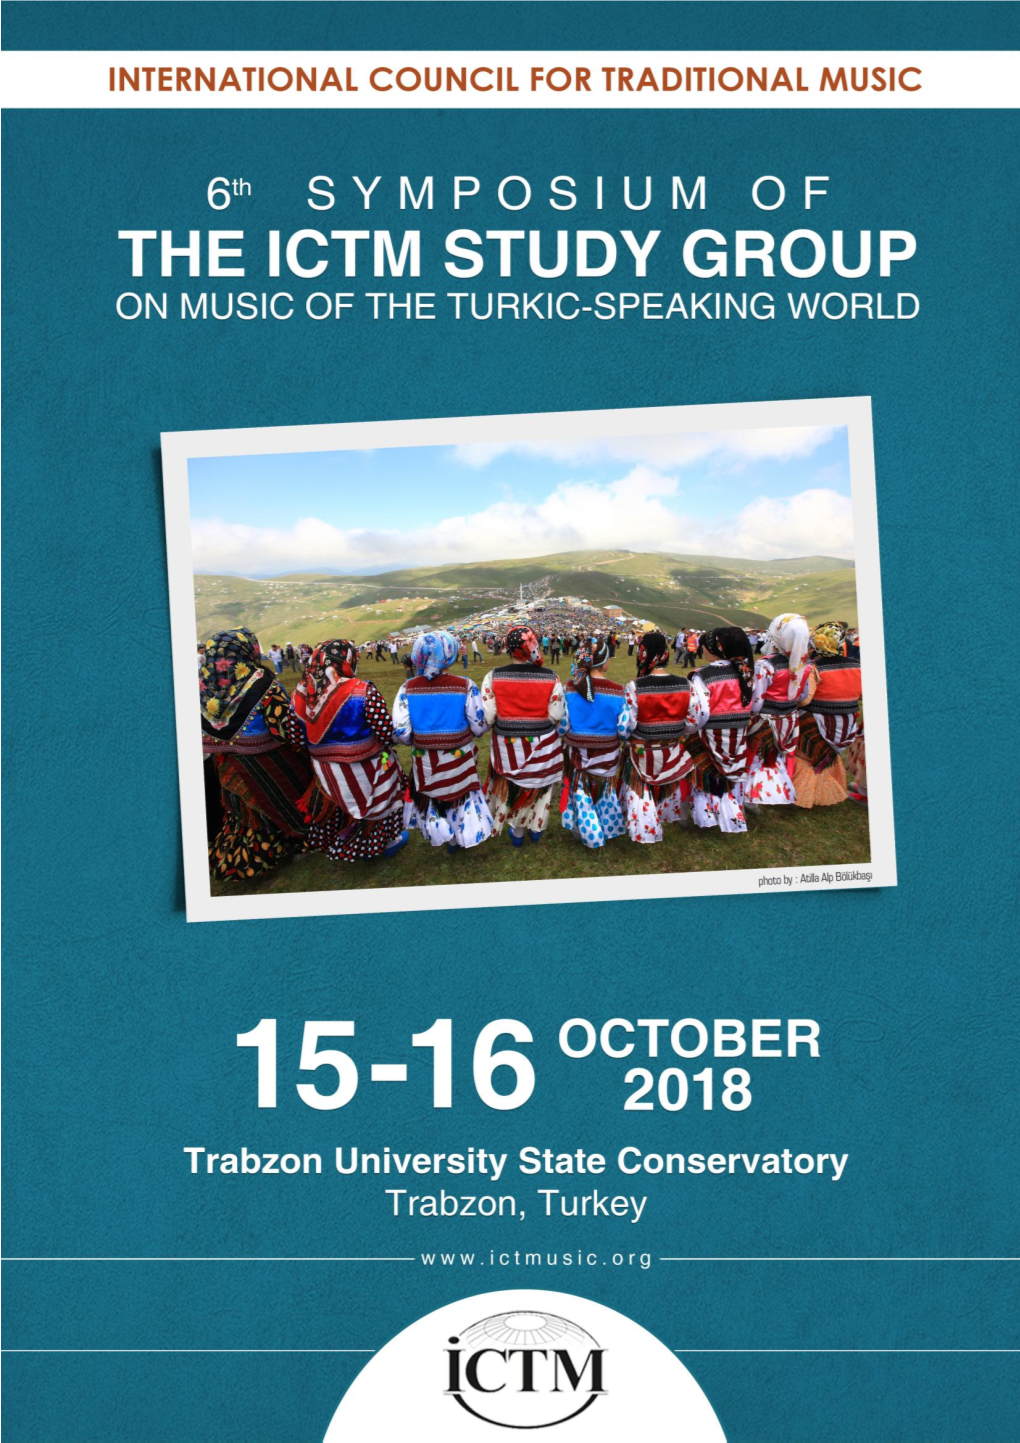 The ICTM Study Group on Music of the Turkic-Speaking World